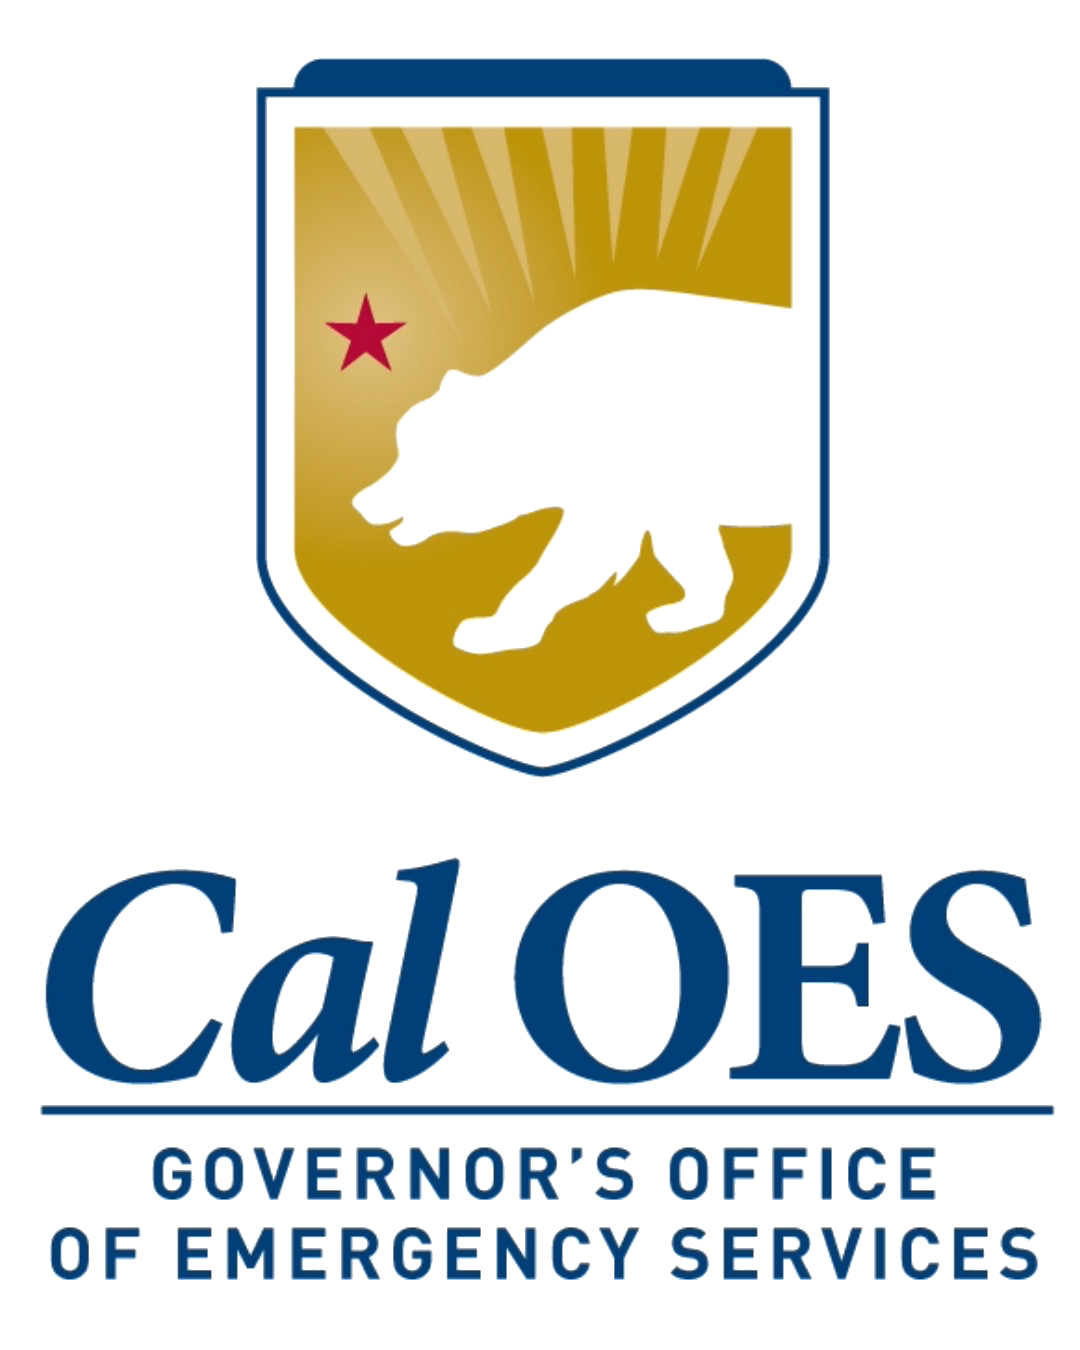 California Office of Emergency Services